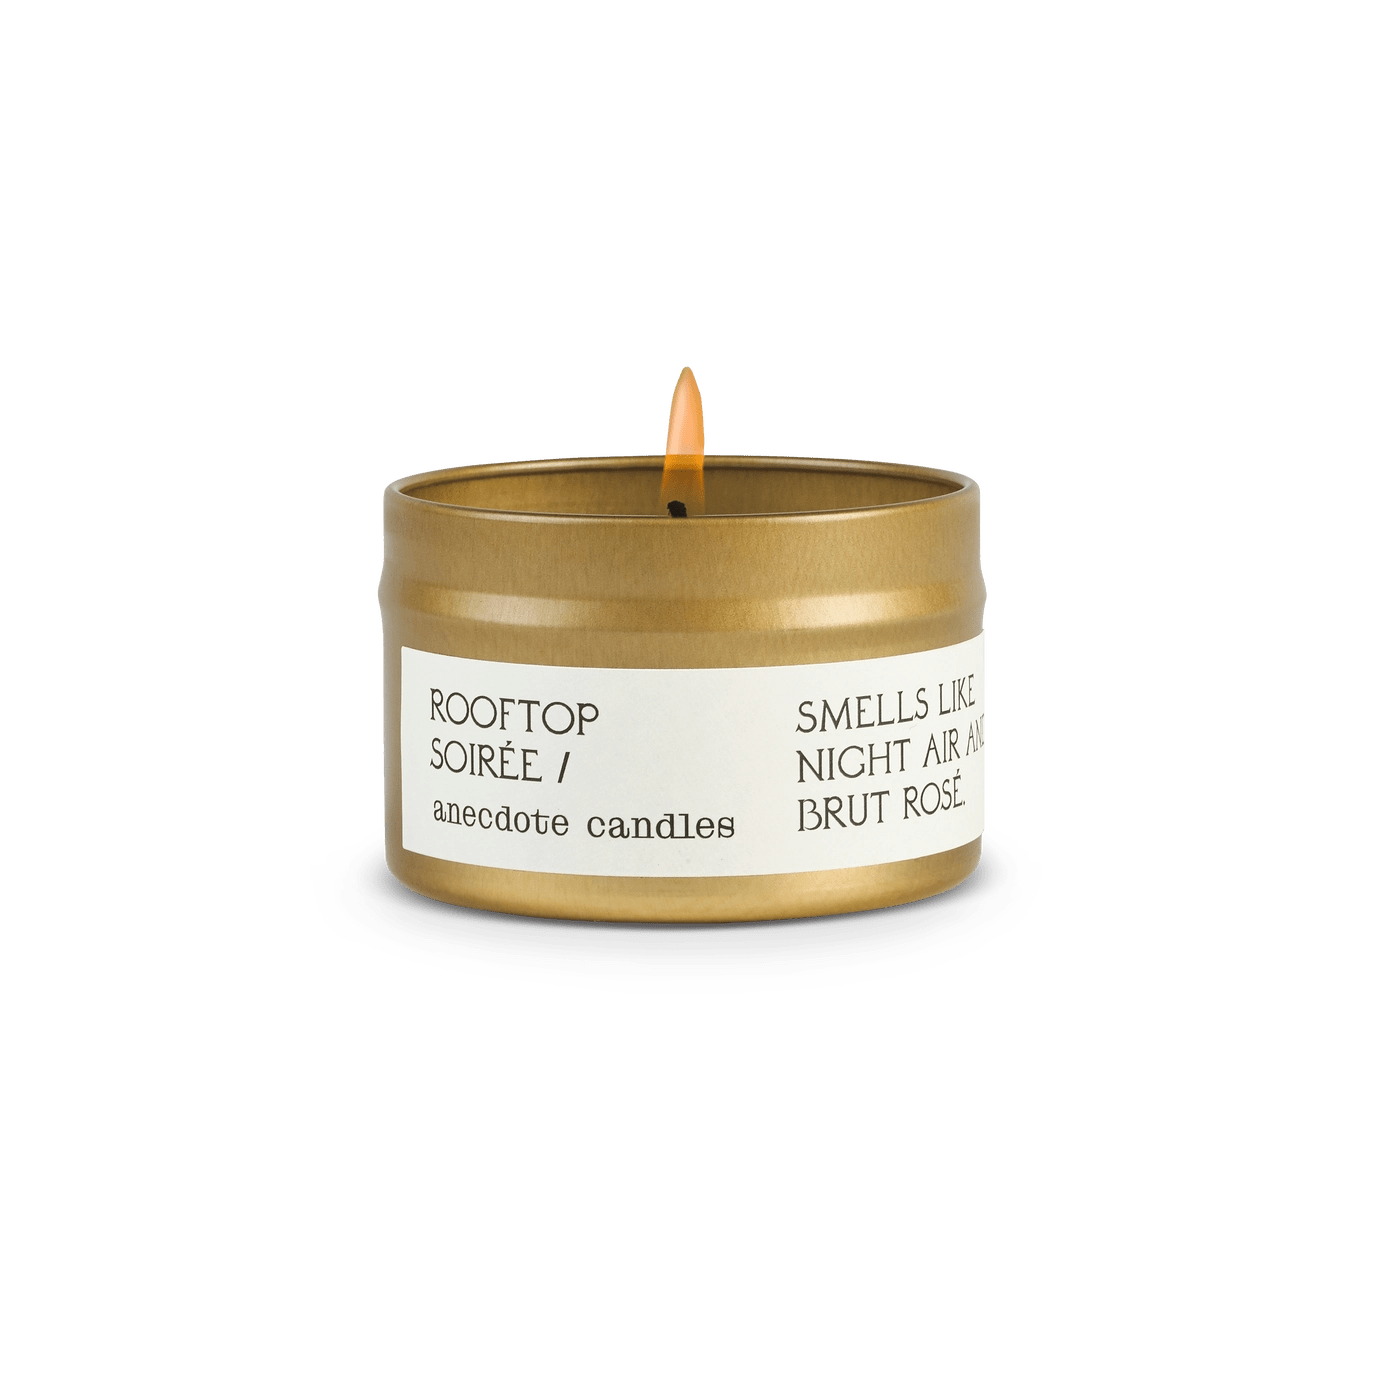 Candle with label that reads Rooftop soiree.